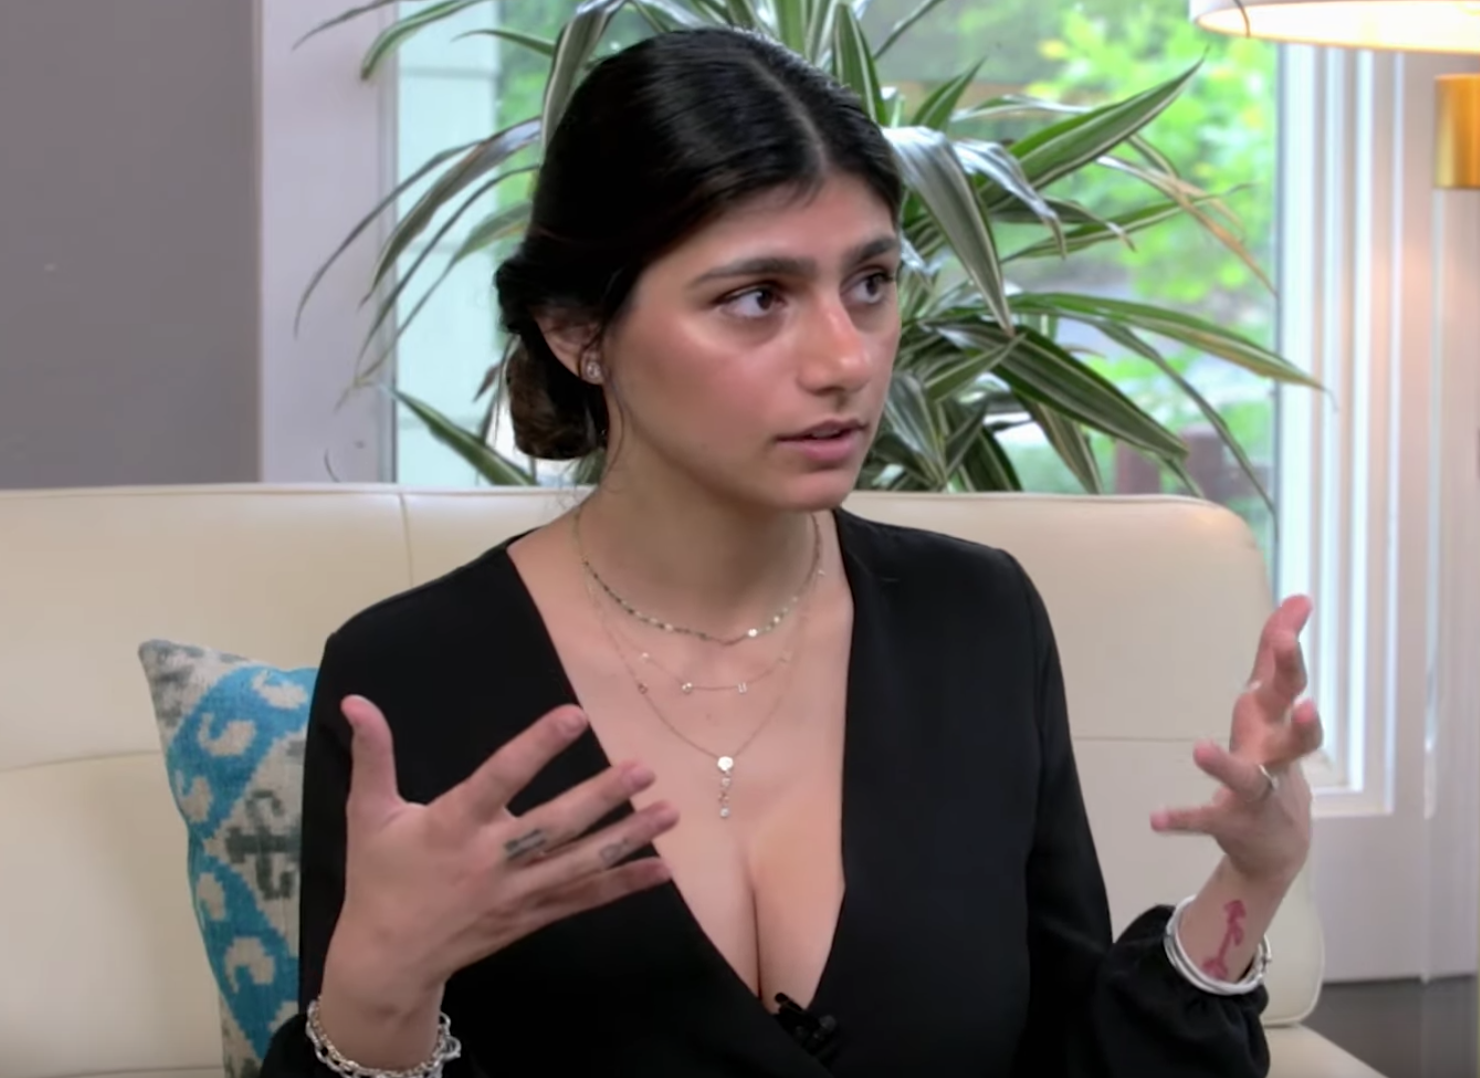 Mia Khalifa Reveals She Only Made $12,000 as an Adult Film Star